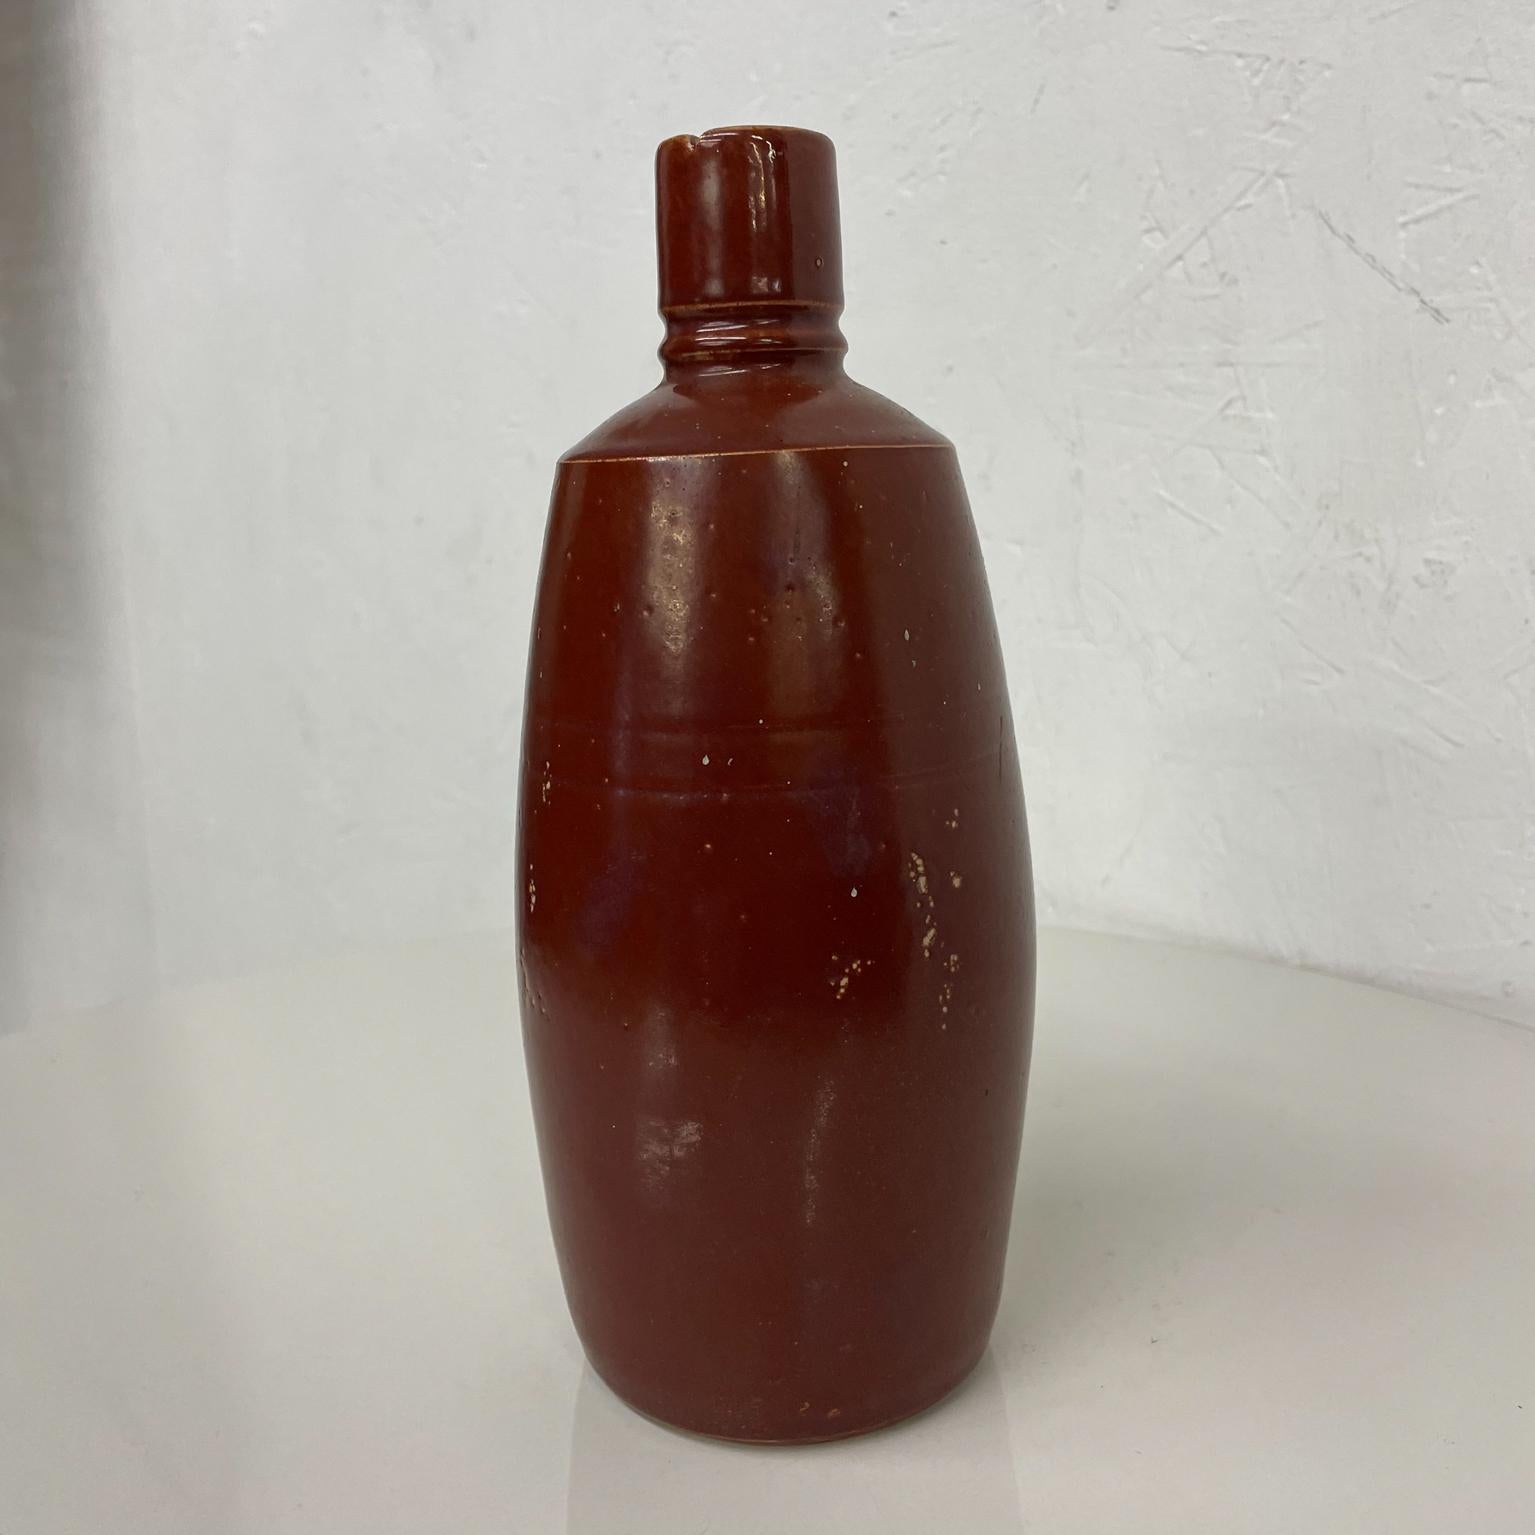 Portuguese Portugal Ceramic Bottle Red Brown Lancers Wine Art Pottery 1970s